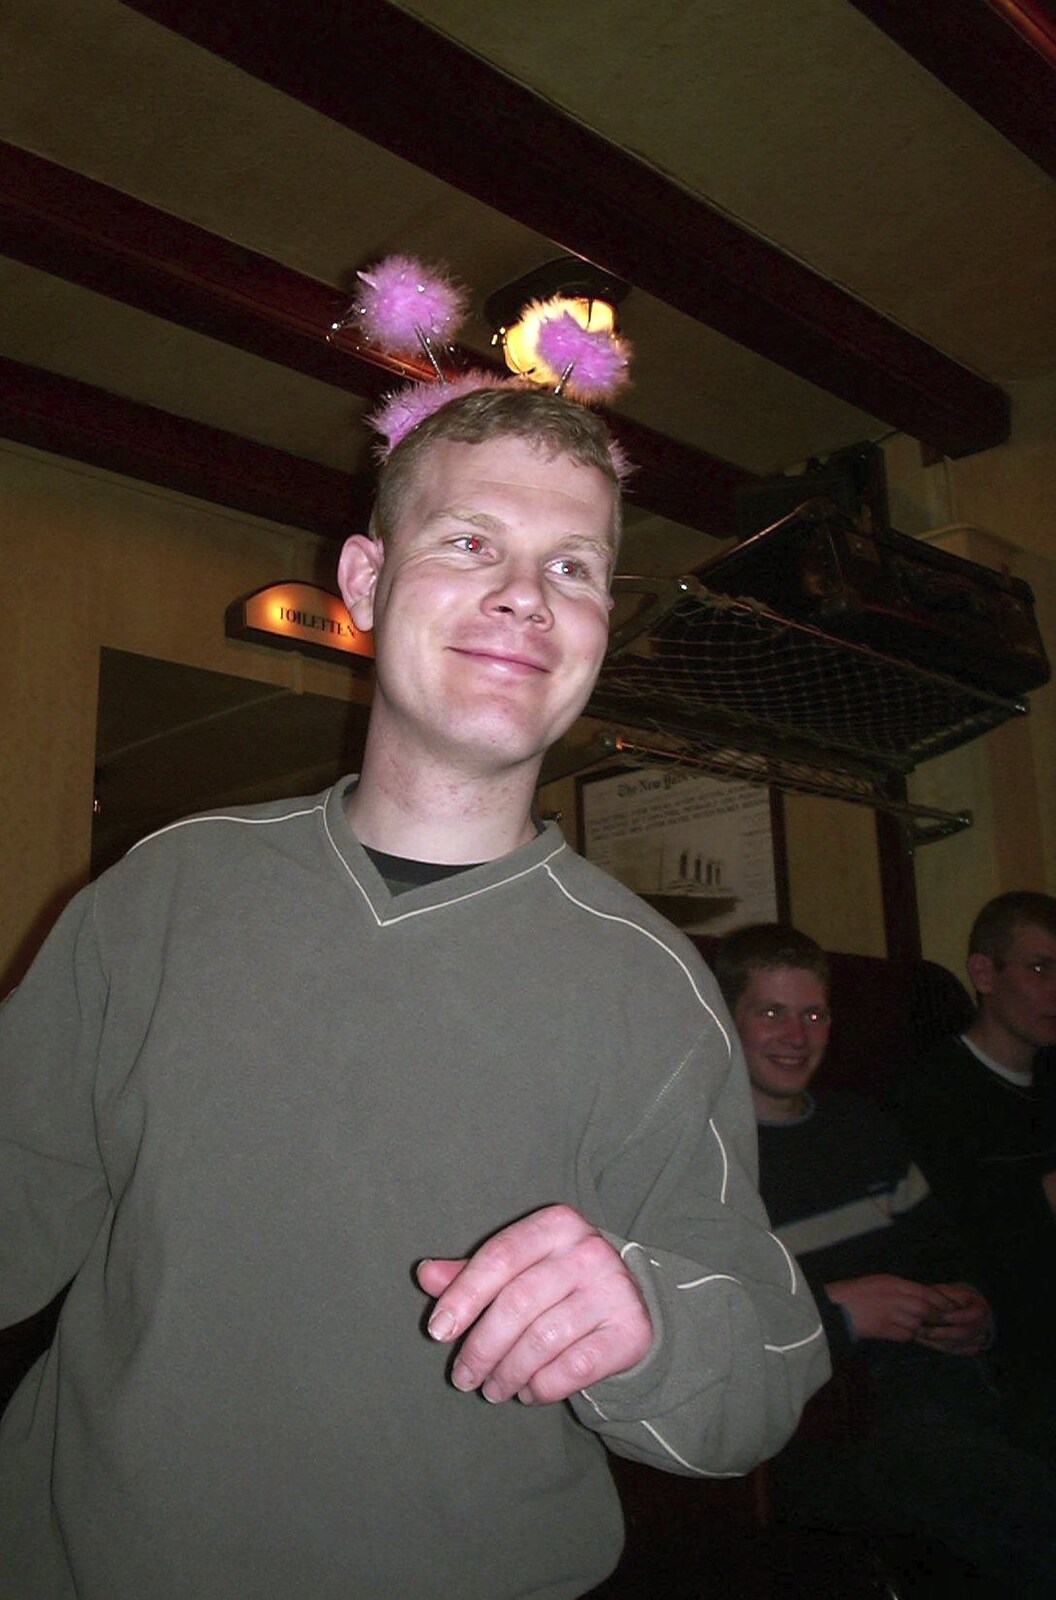 Mike models his deeley-boppers from Mikey-P's Stag Weekend, Amsterdam, Netherlands - 5th March 2004